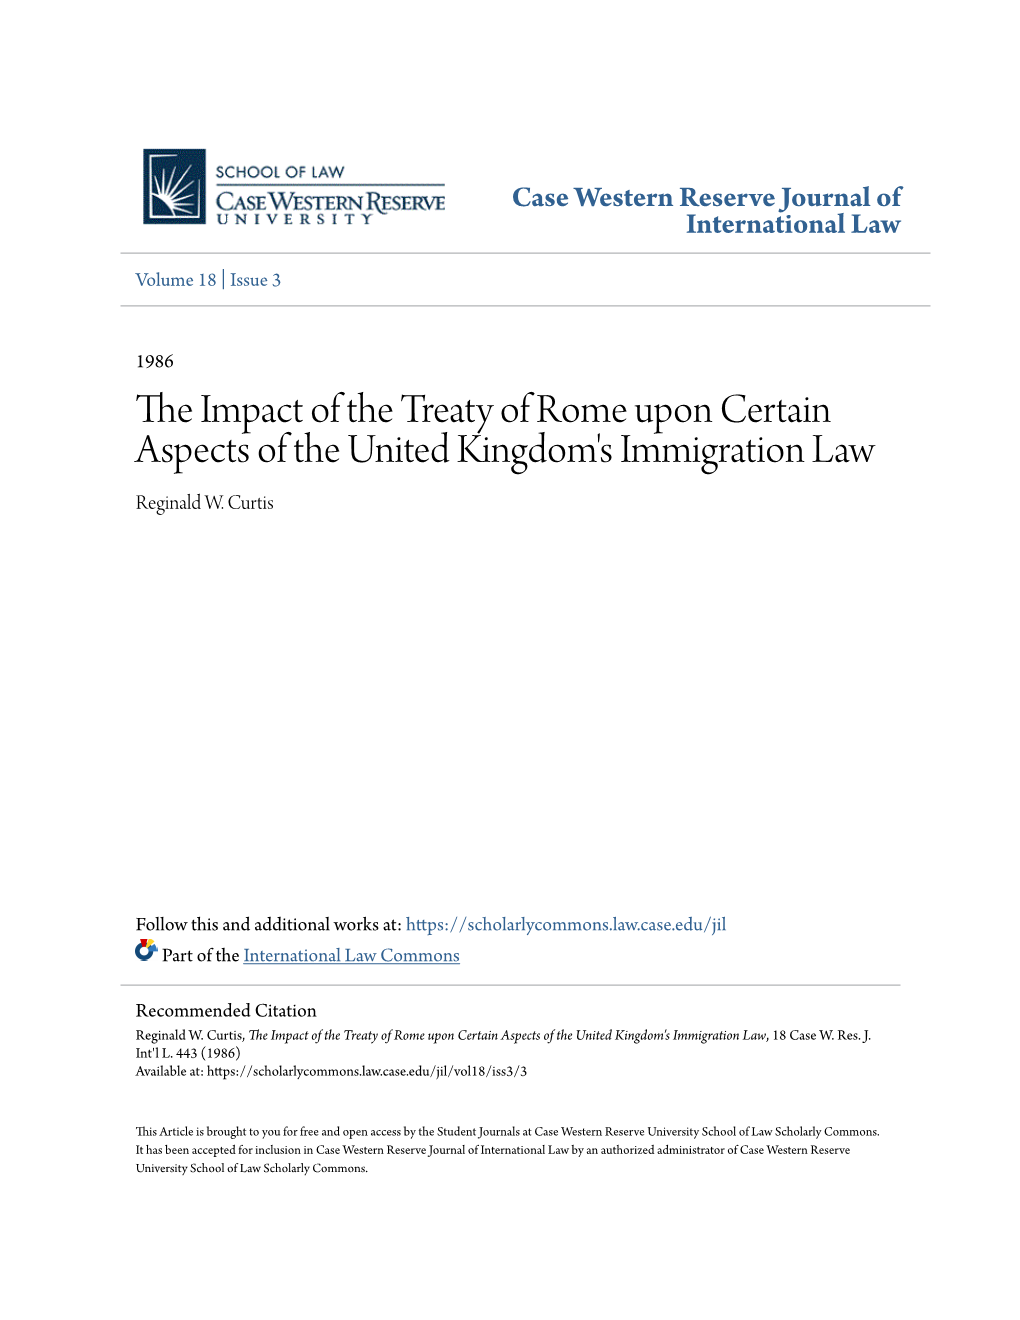 The Impact of the Treaty of Rome Upon Certain Aspects of the United Kingdom's Immigration Law, 18 Case W